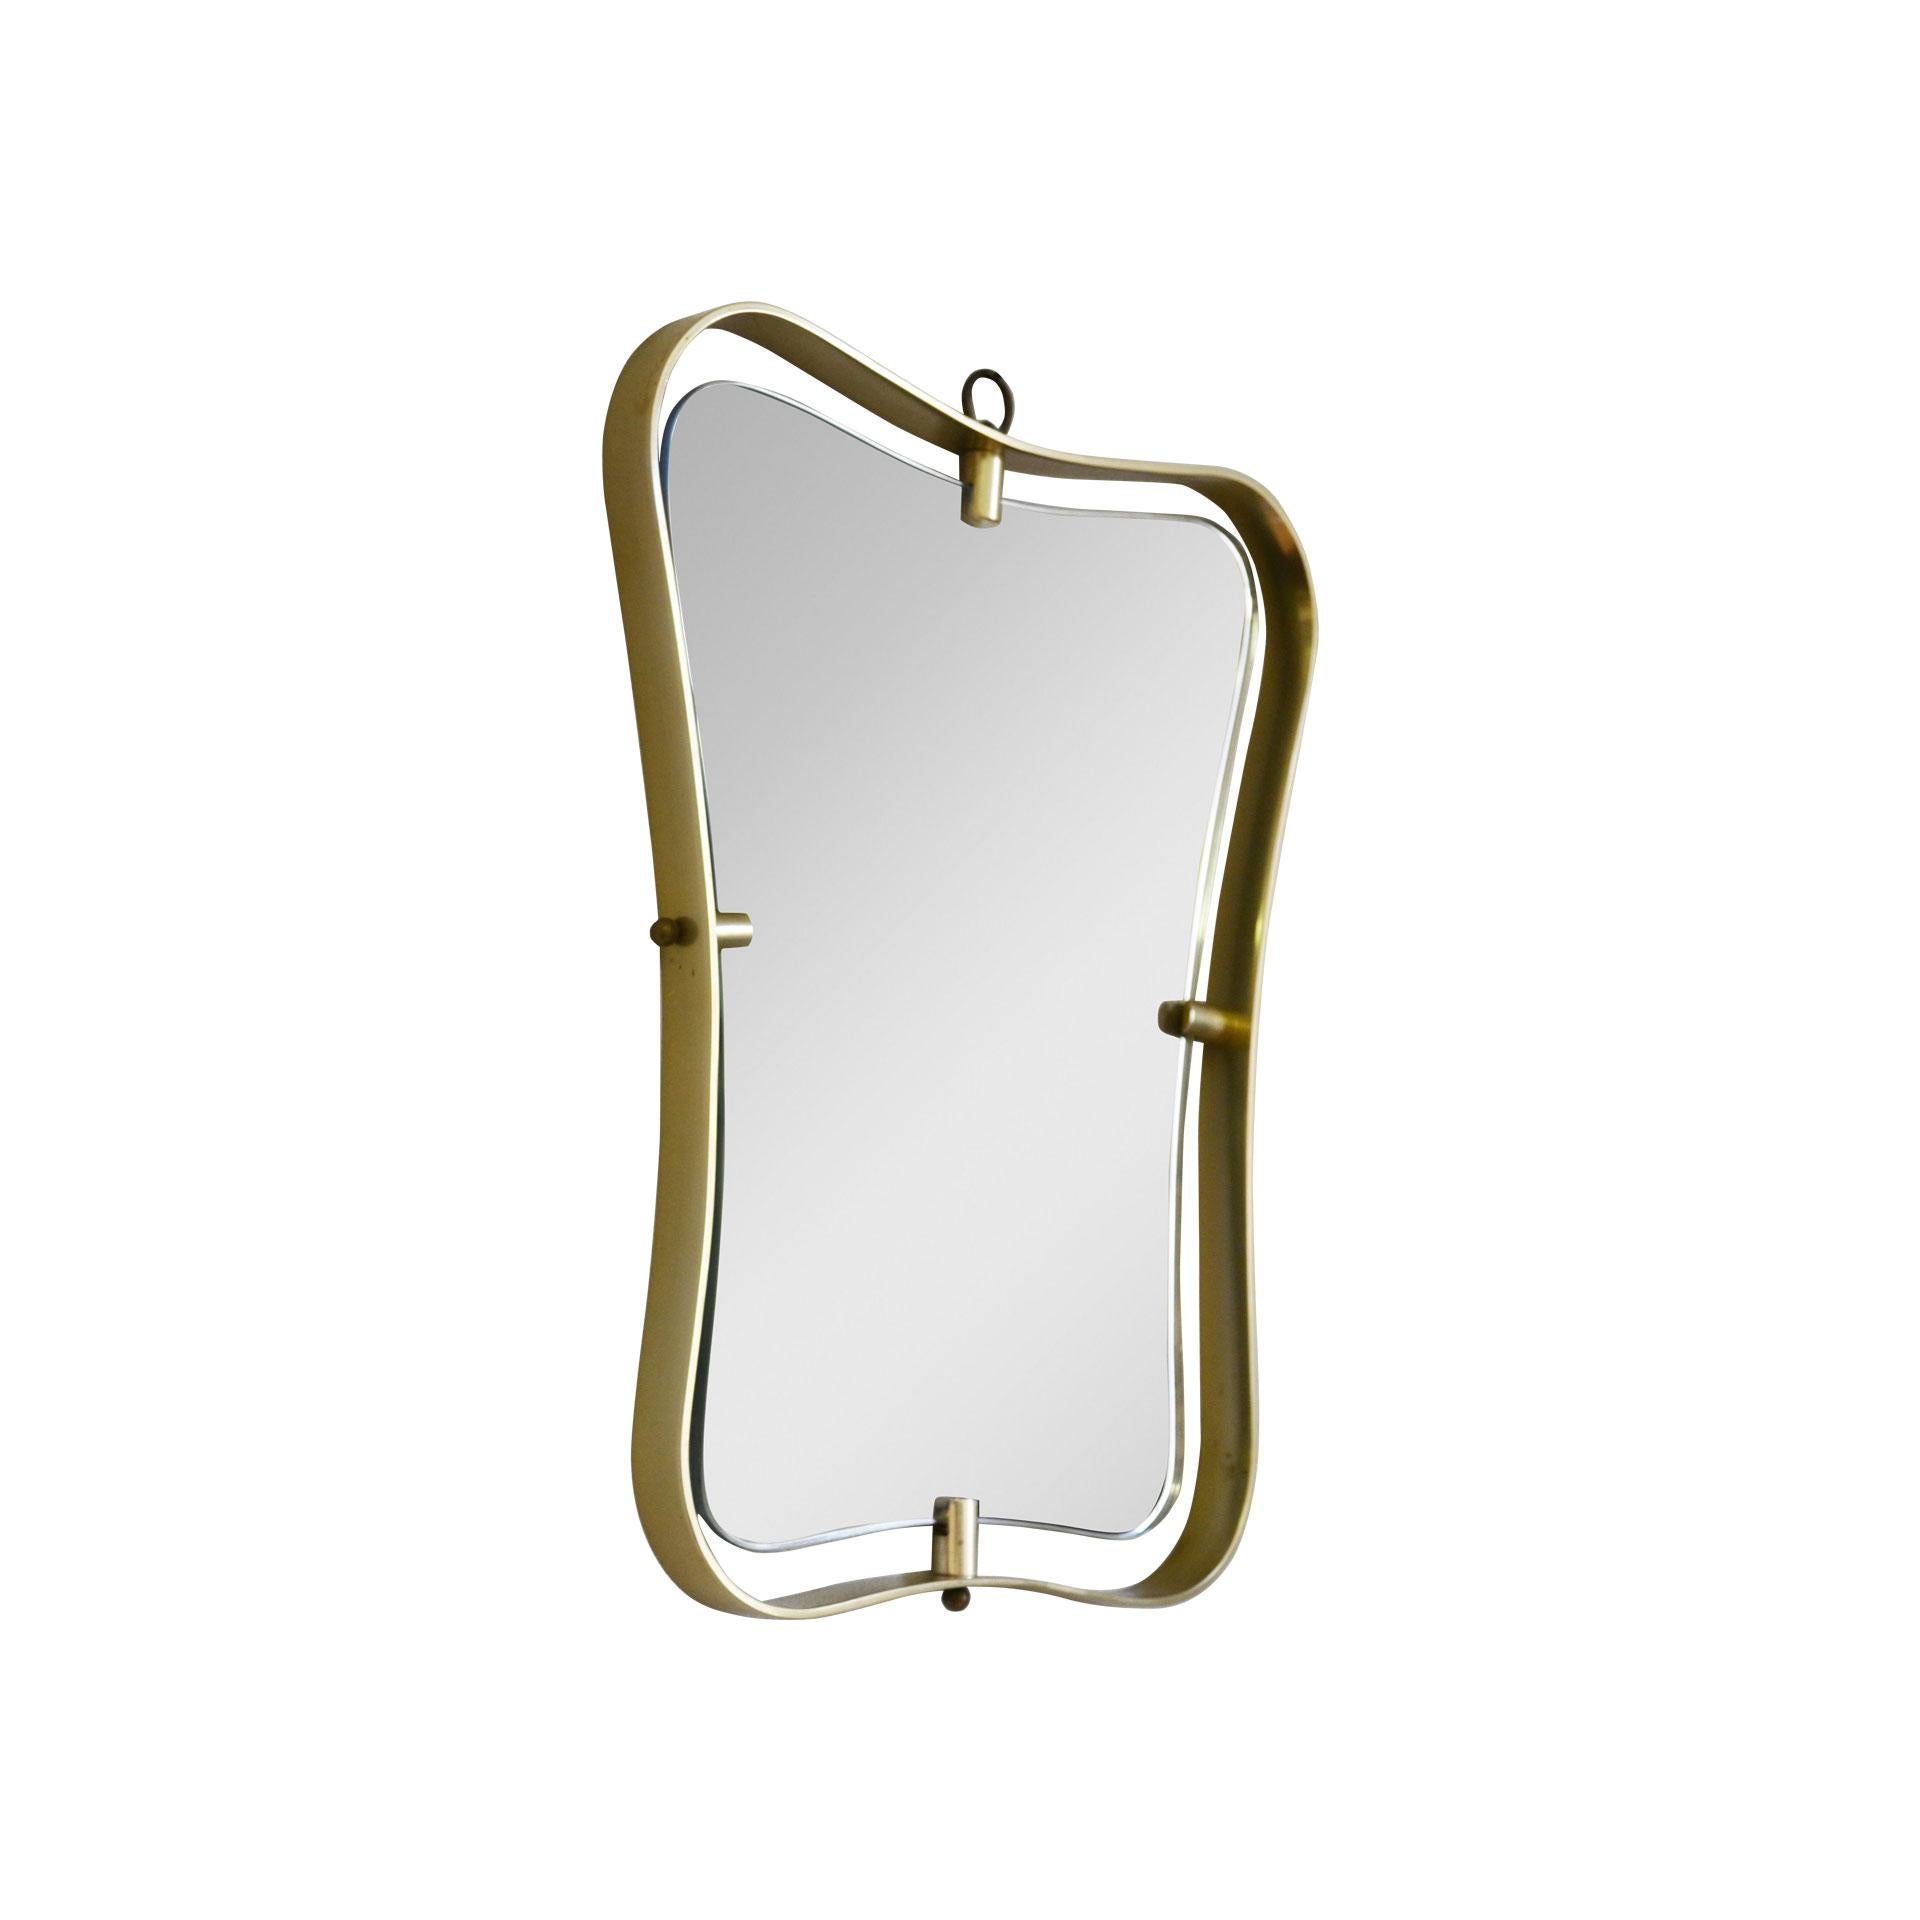 Mid-Century Modern 20th Century Fontana Arte Wall Mirror with Frame in Shaped Brass